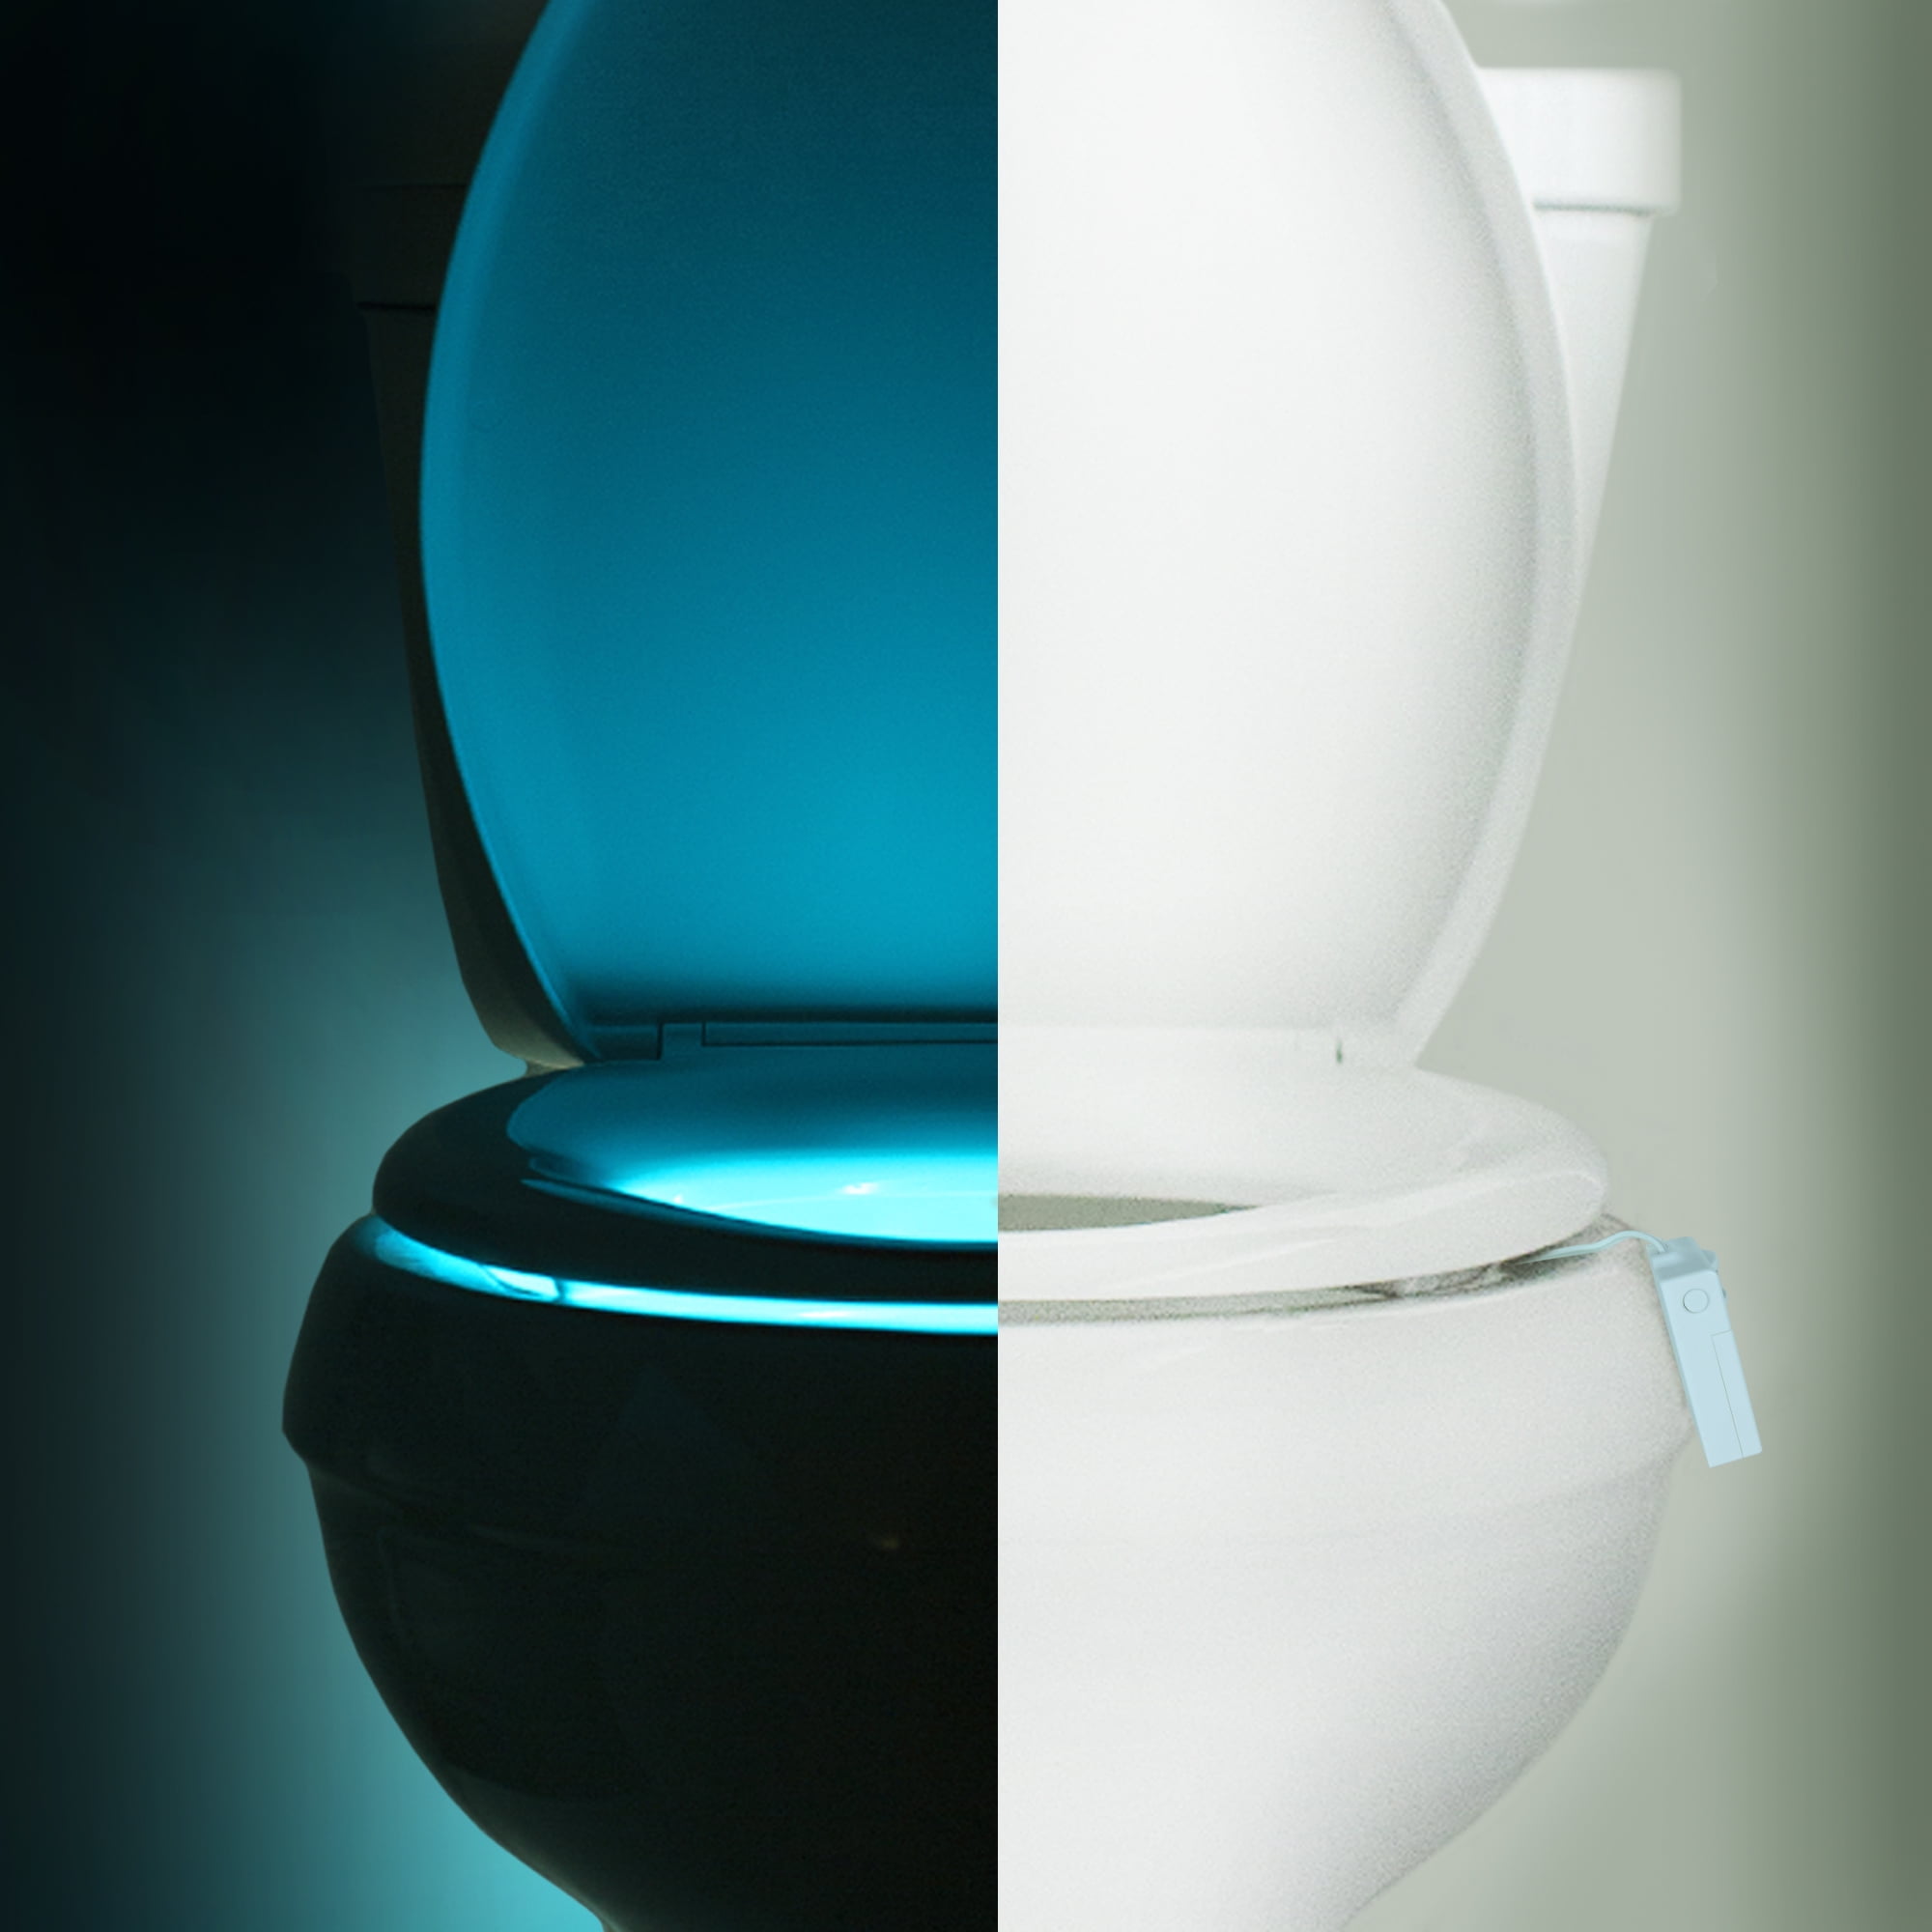 BYU student makes Shark Tank deal for toilet night light - The